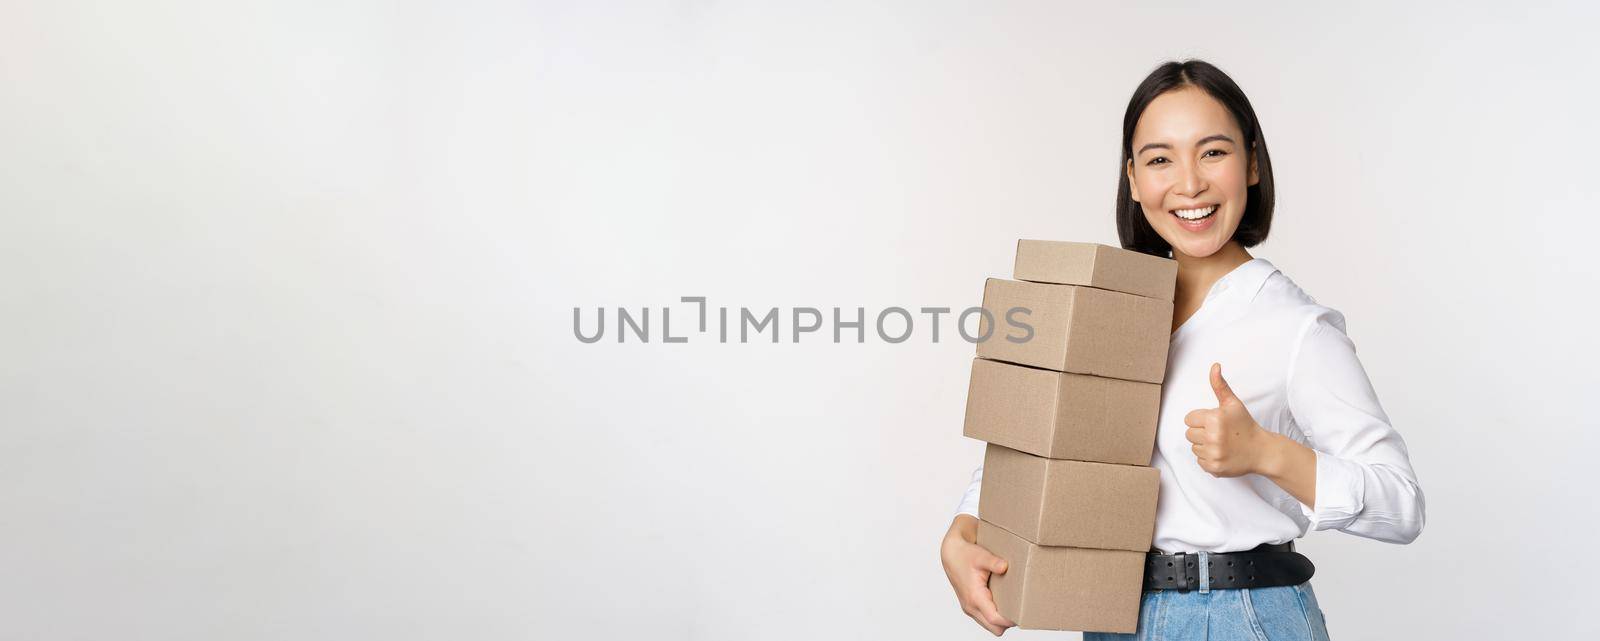 Image of happy modern asian woman showing thumbs up, holding boxes delivery goods, standing against white background.